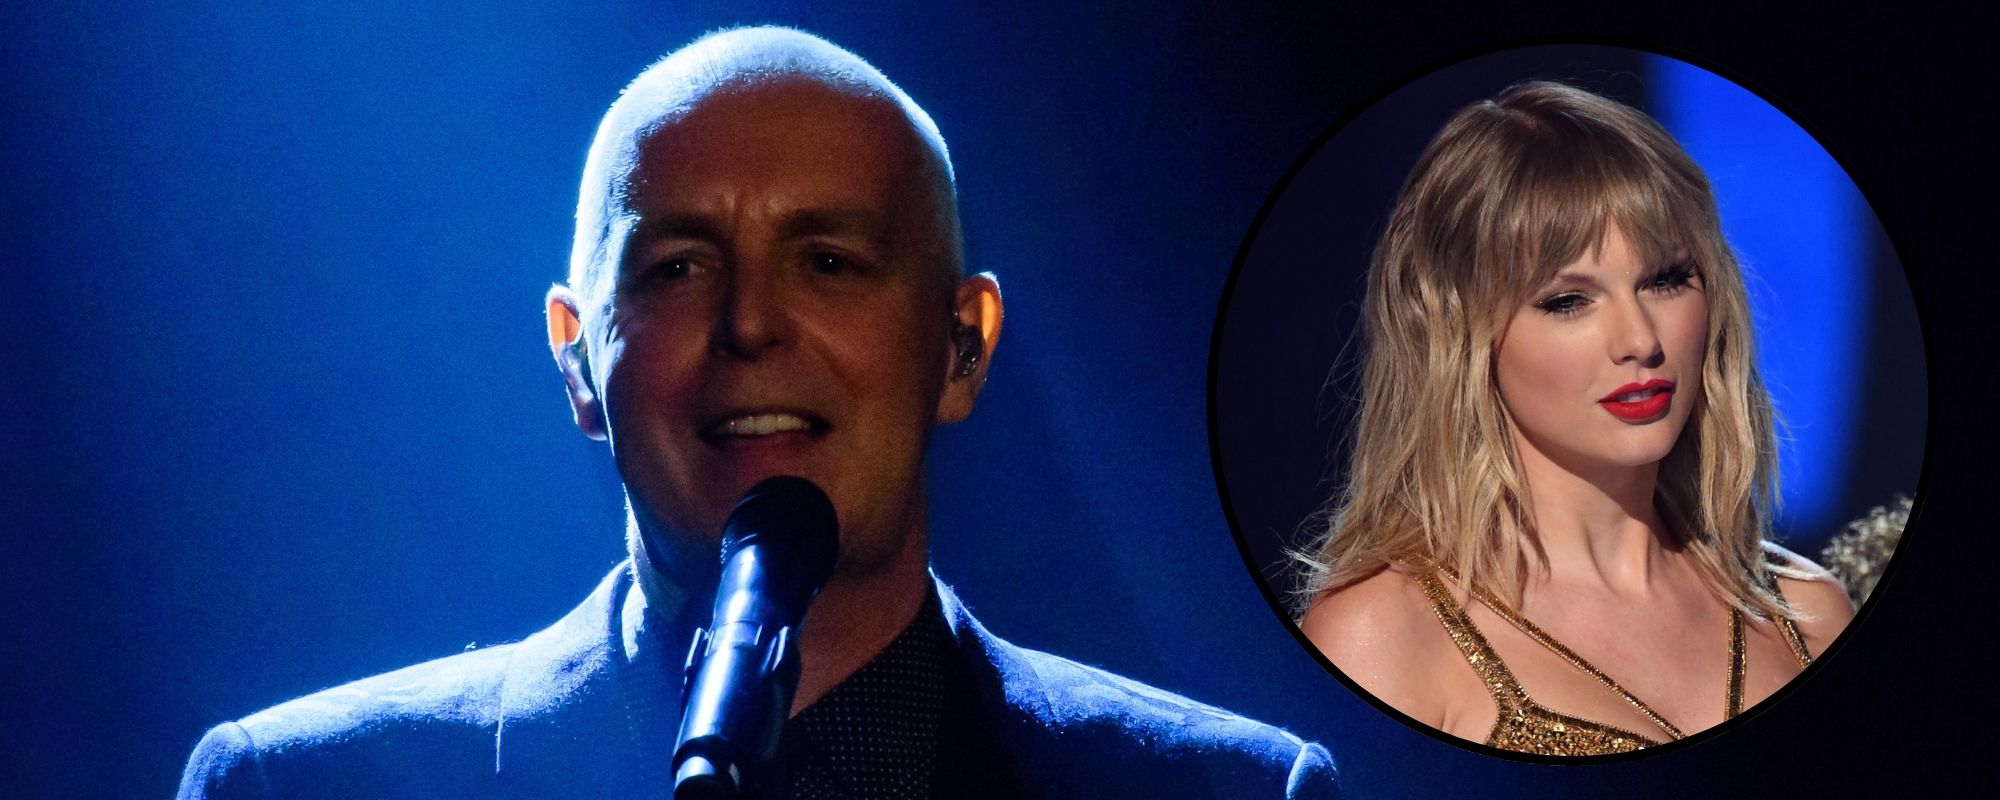 Pet Shop Boys’ Neil Tennant Asks Where Taylor Swift’s “Famous Songs” Are